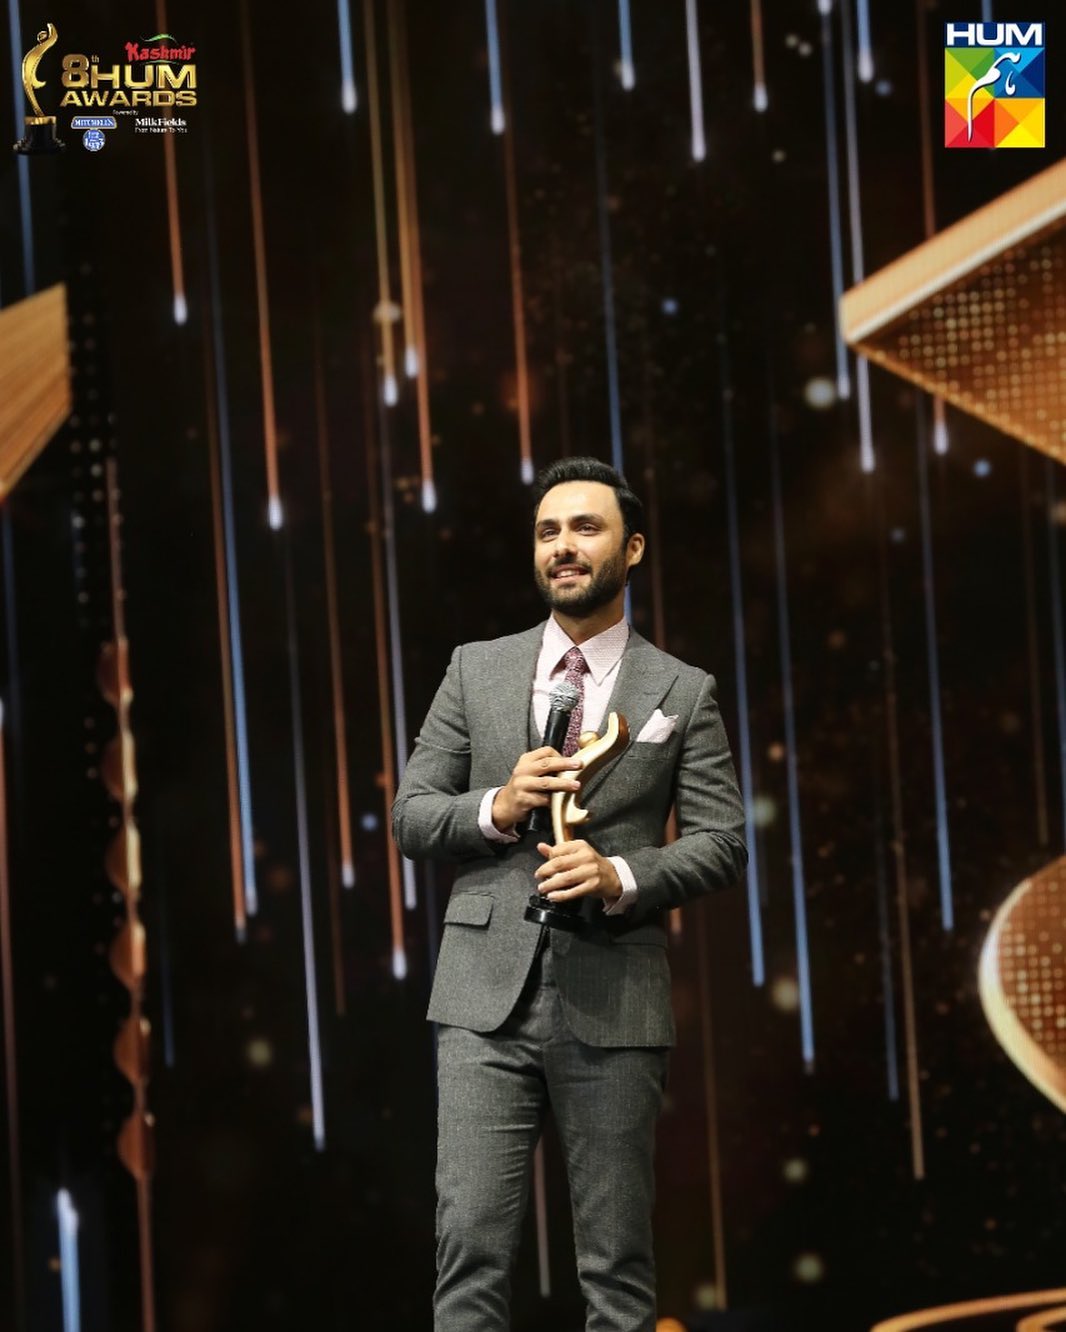 hum style award of best actor male